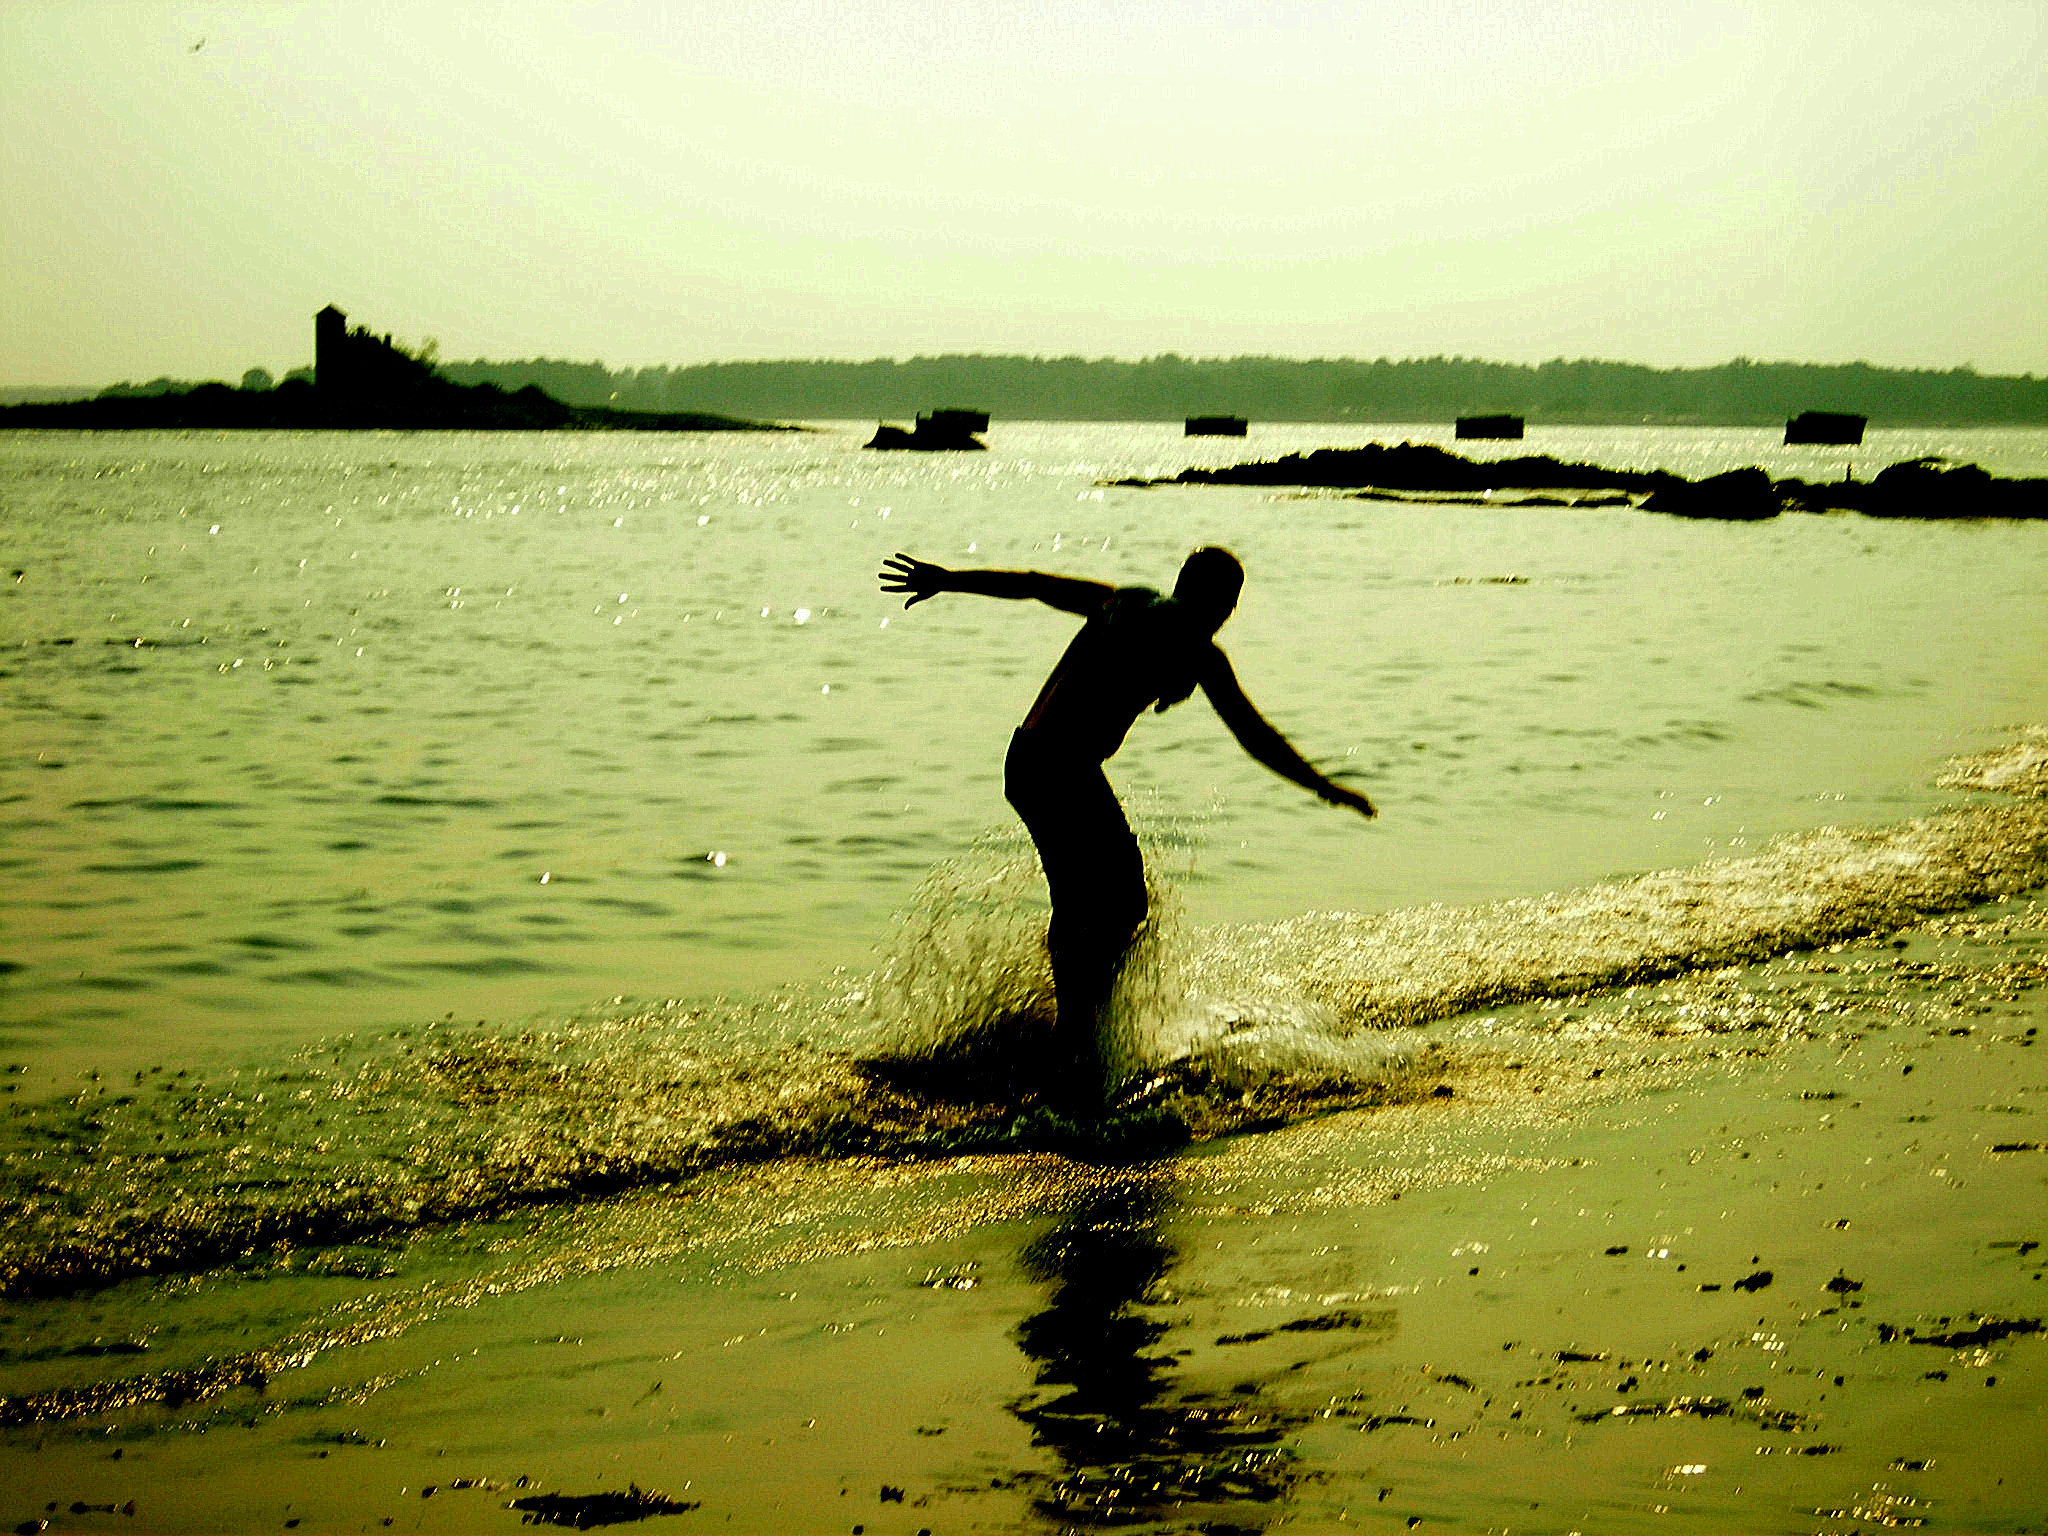 Silhouette Skimboarder (user submitted)